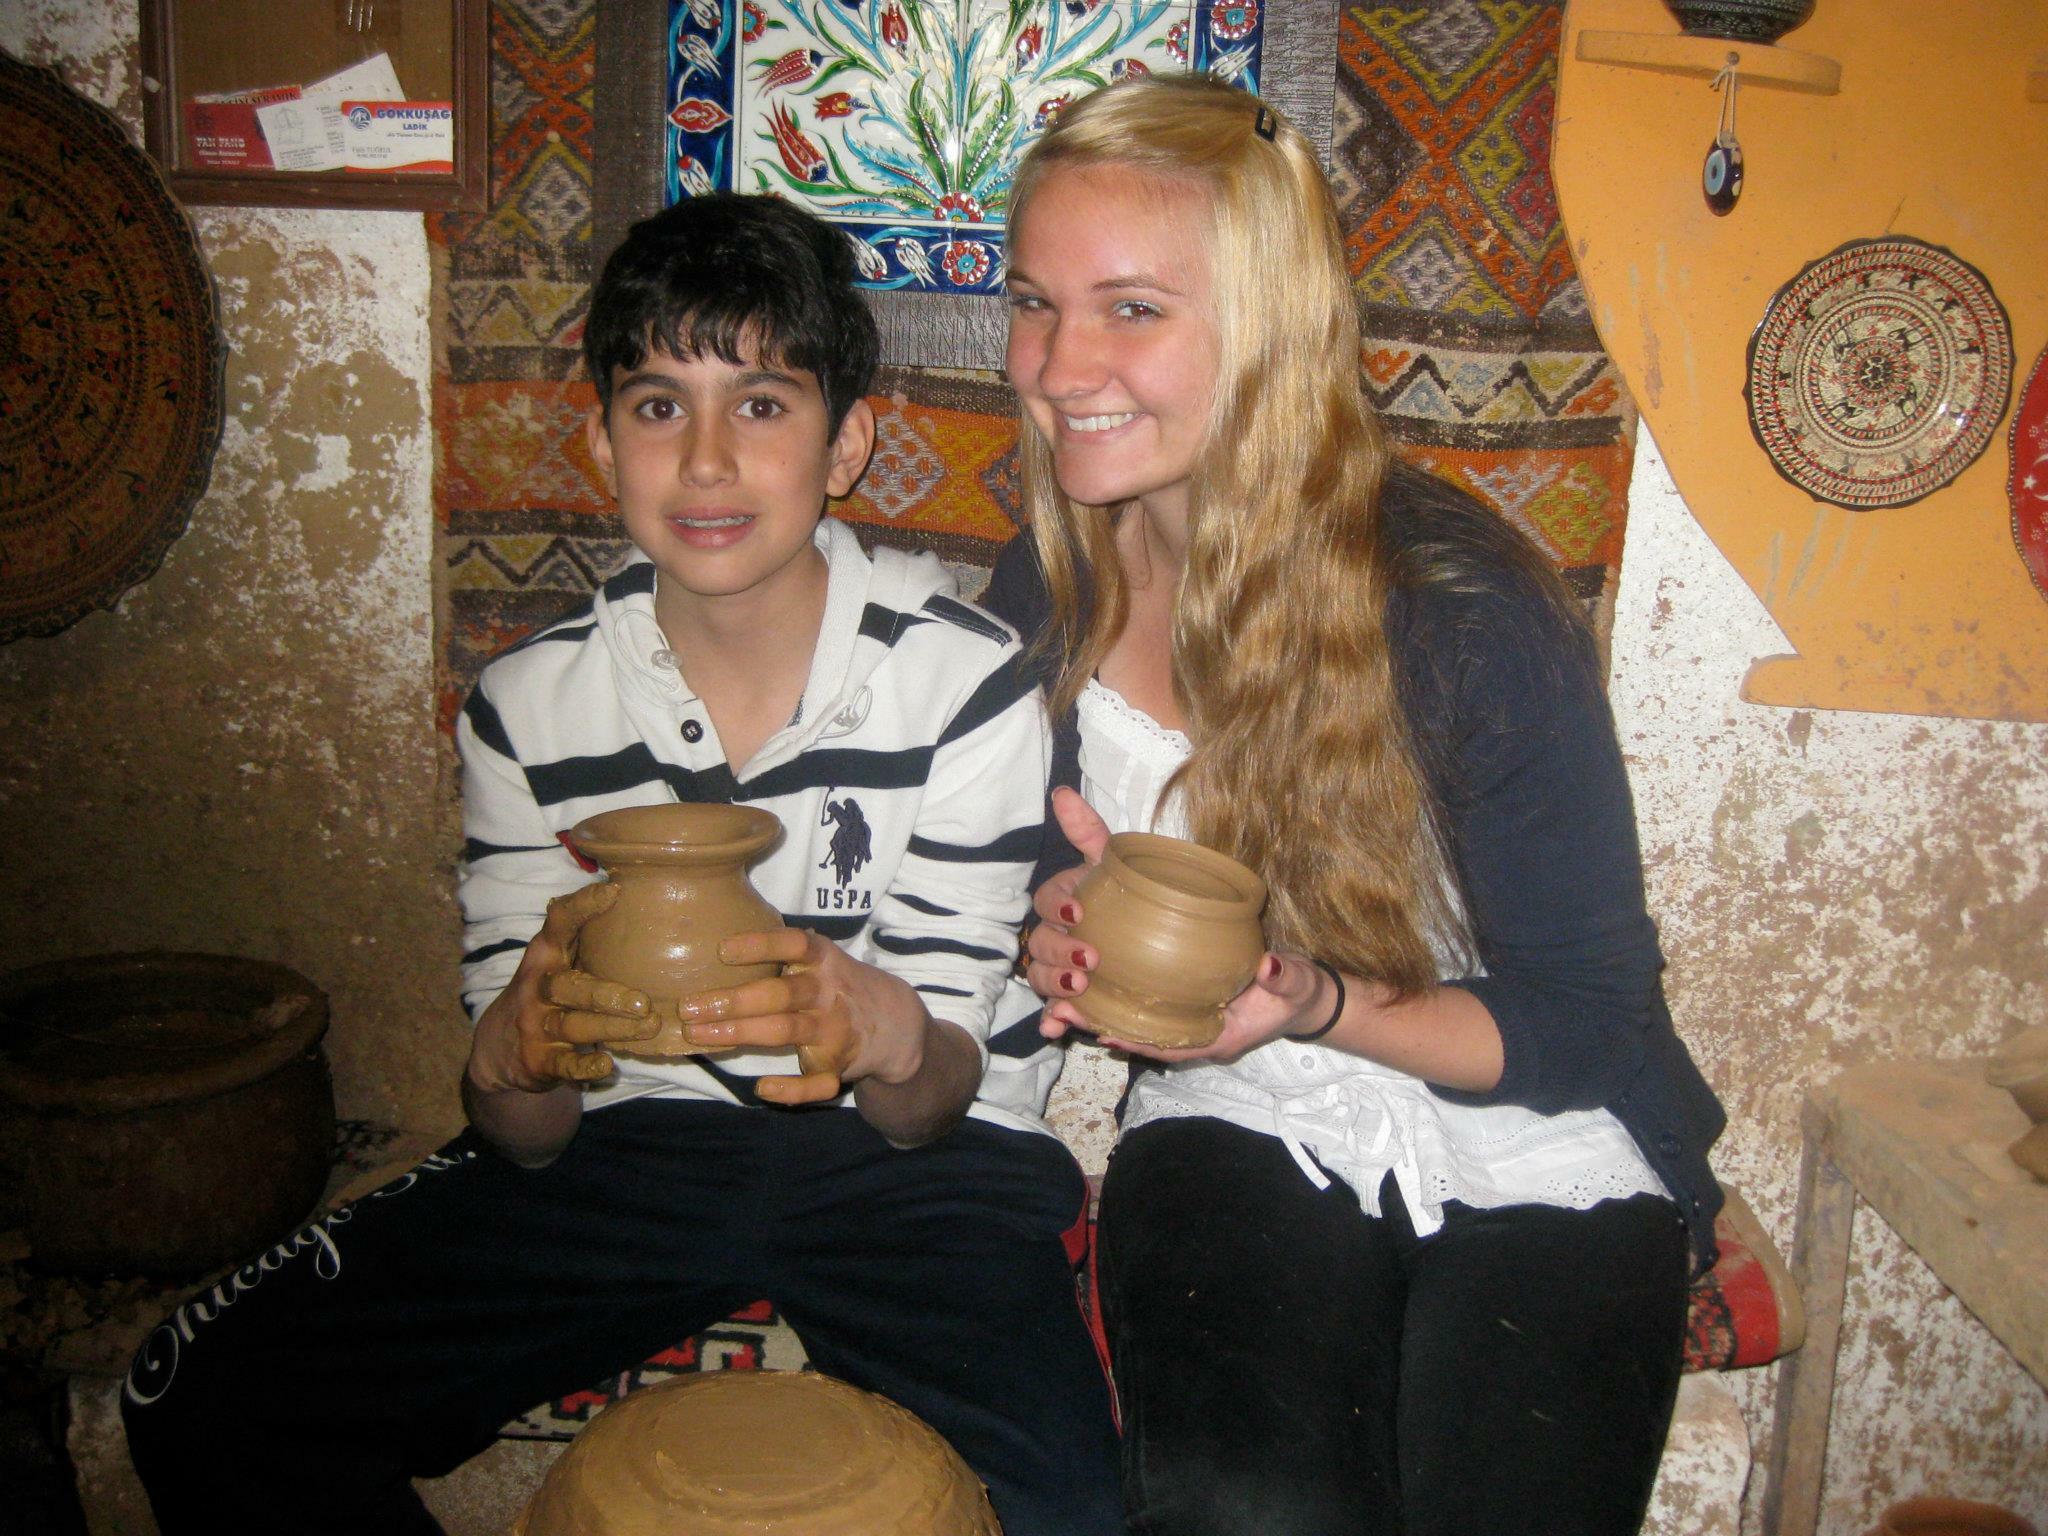 Kendra smiling and posing with her host brother and ceramic pots they made in pottery class